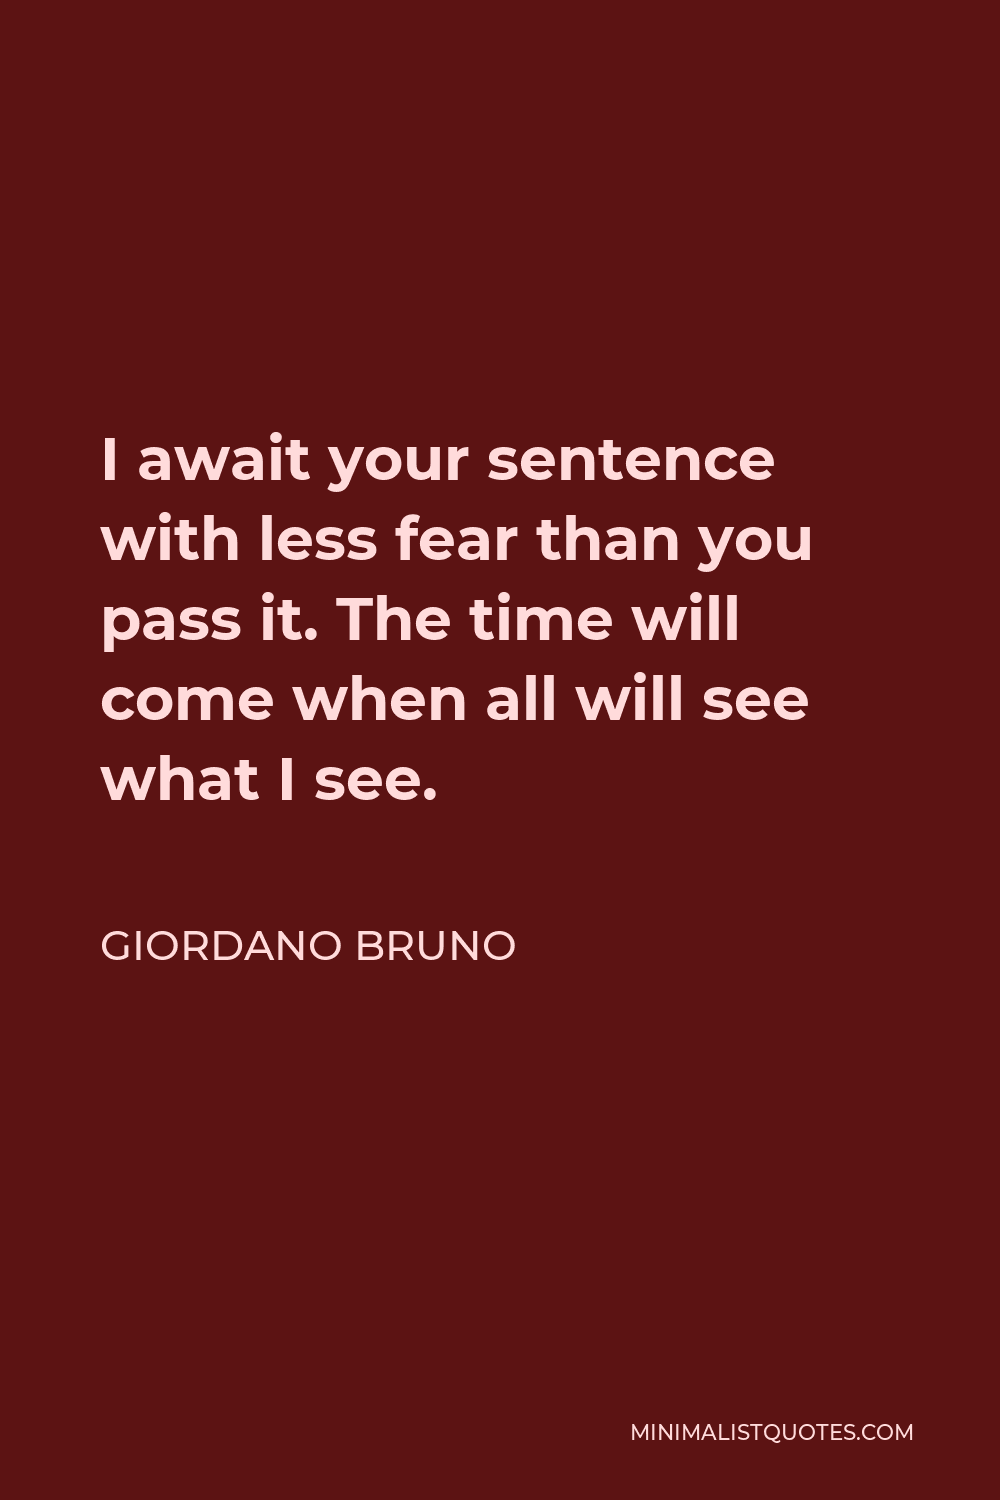 Giordano Bruno Quote - I await your sentence with less fear than you pass it. The time will come when all will see what I see.